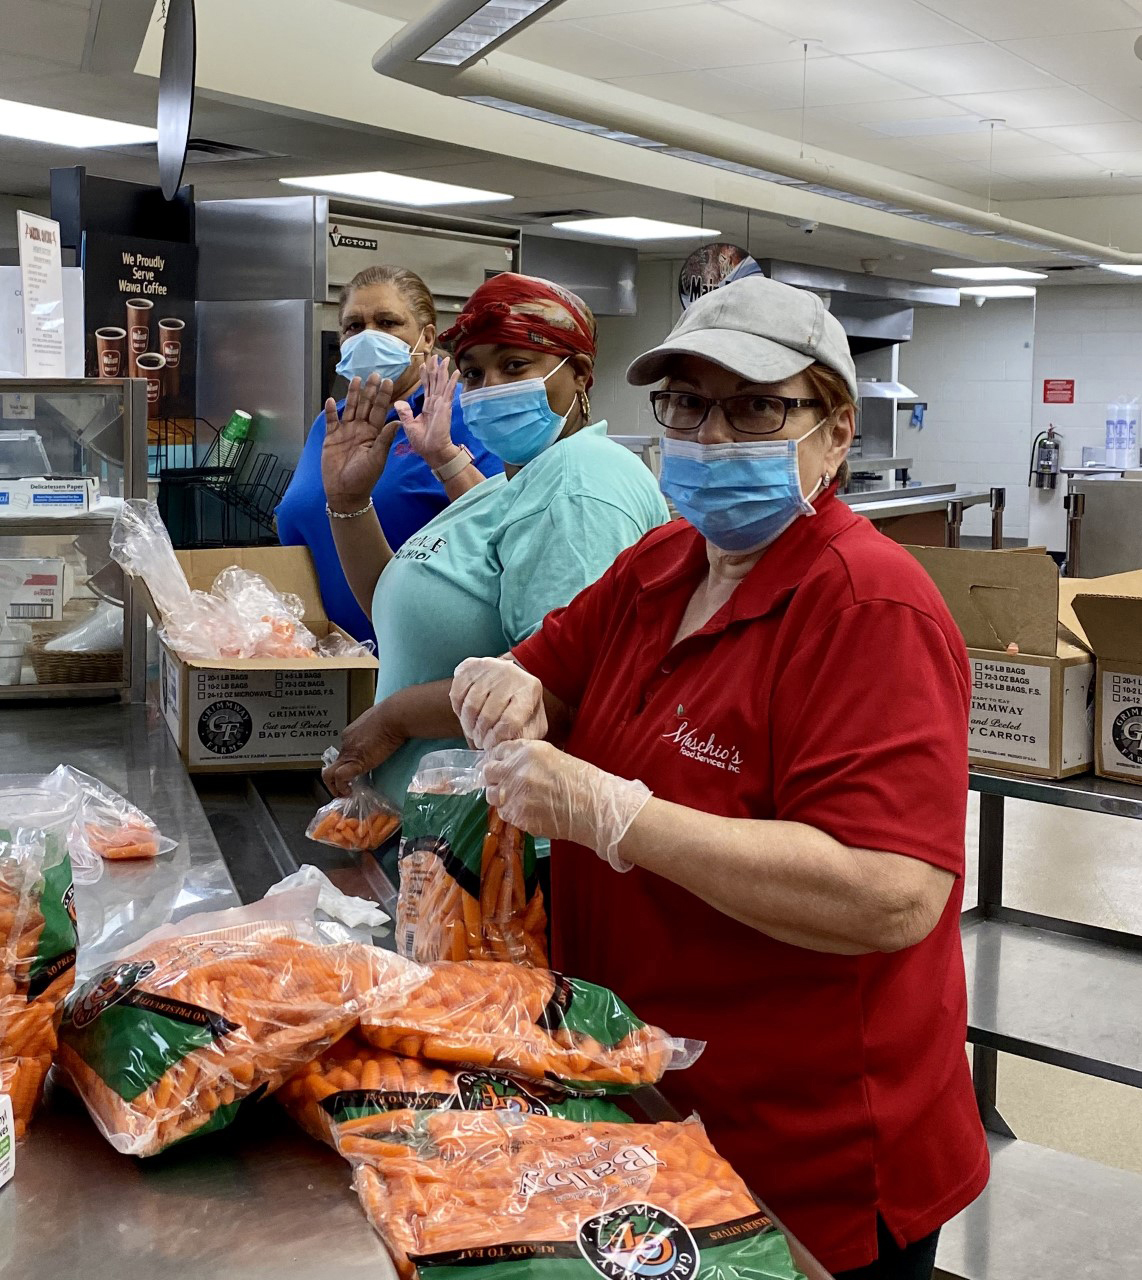 Lawrence Township: Packing Lunches by the Thousands: Districts throughout New Jersey continued to provide meals for students and families. In Lawrence Township (Mercer), the district prepared and delivered more than 2,500 lunches a week for about 503 students.